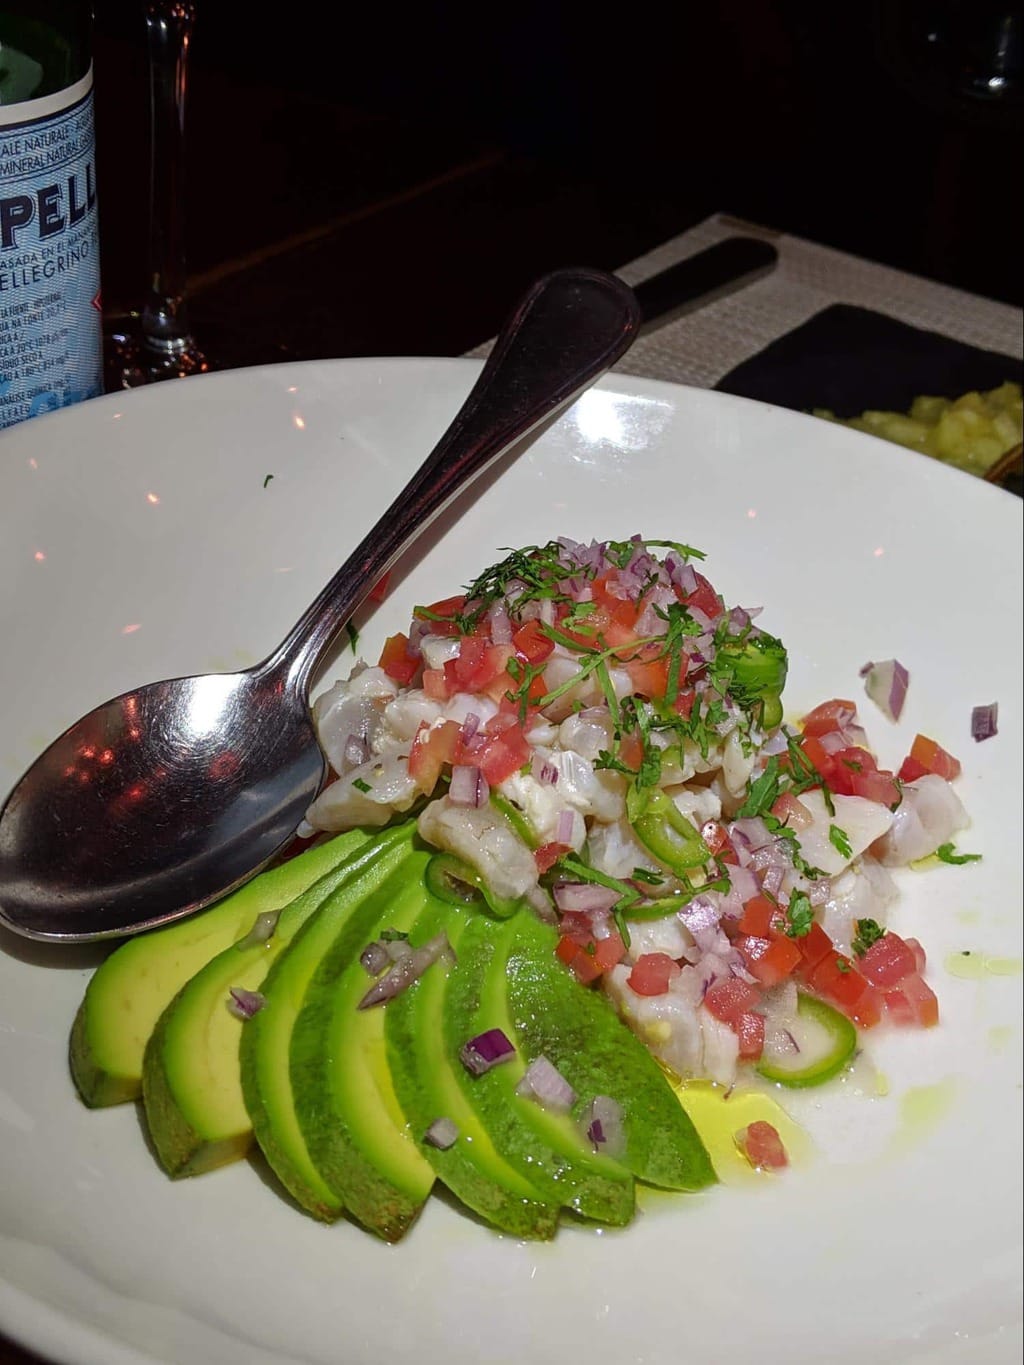 Aguachile is nothing more than a ceviche